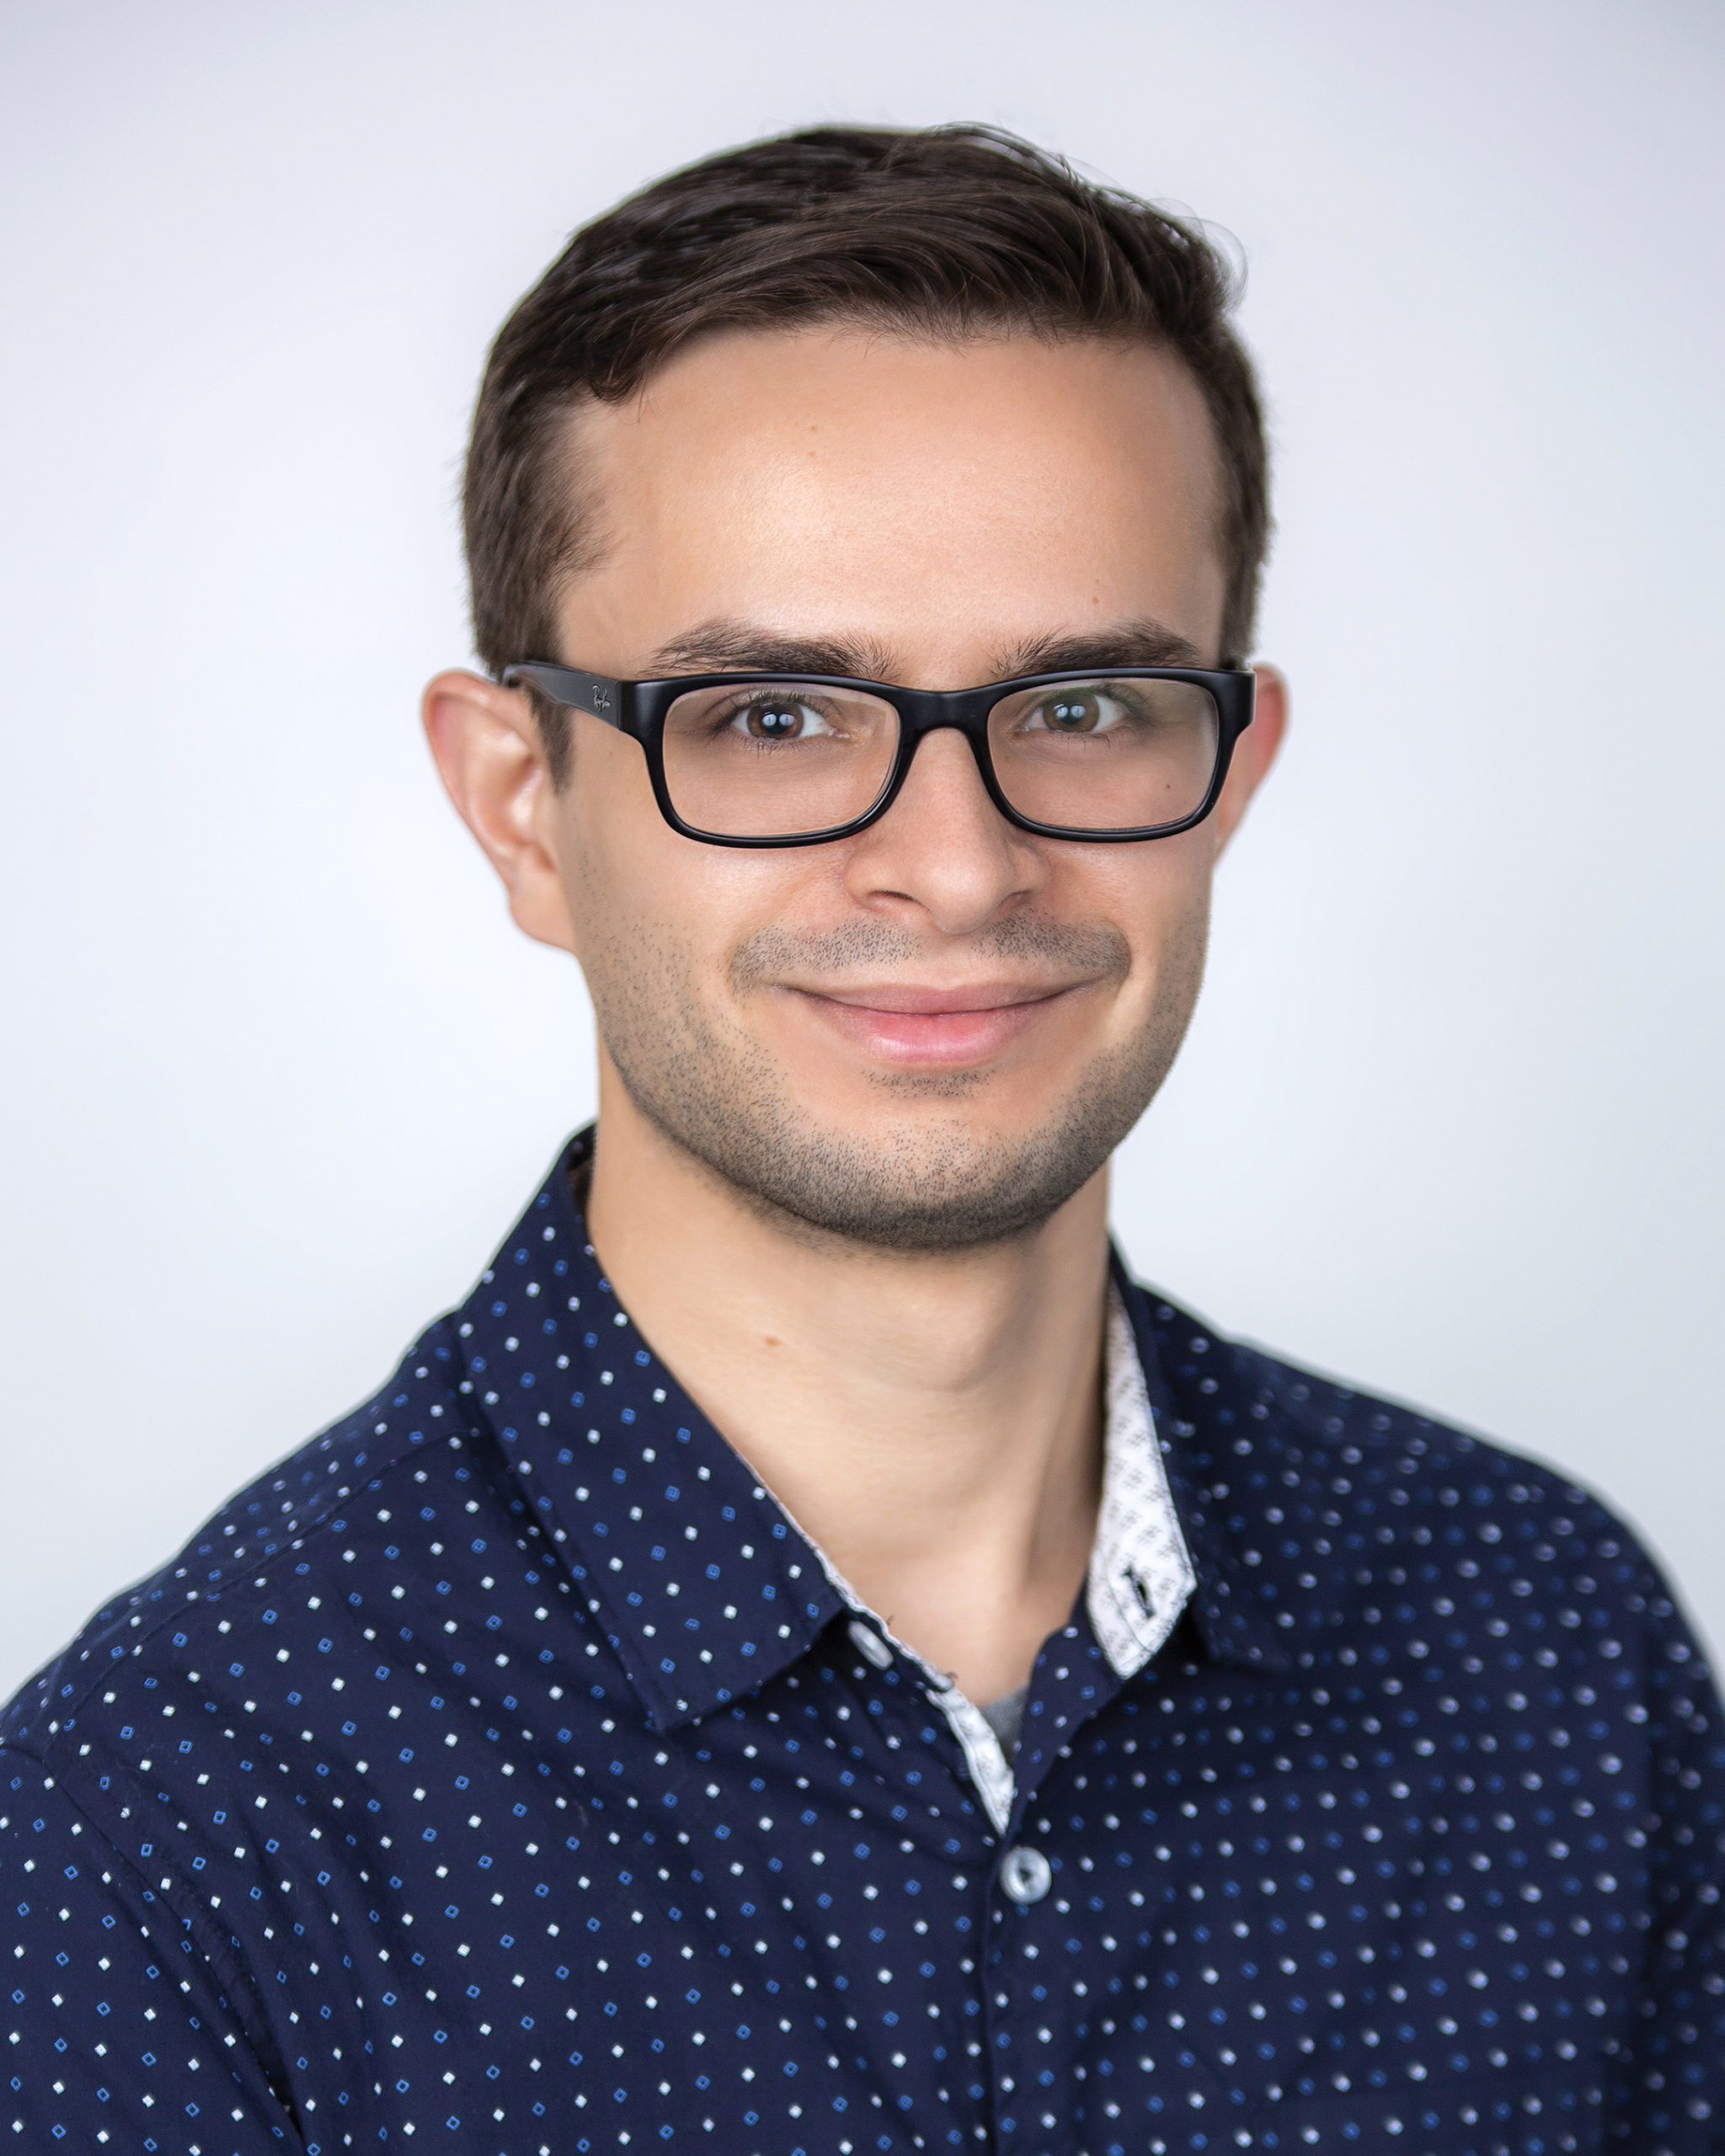 Alex Durante is the product manager for Inzata a Data Management Software